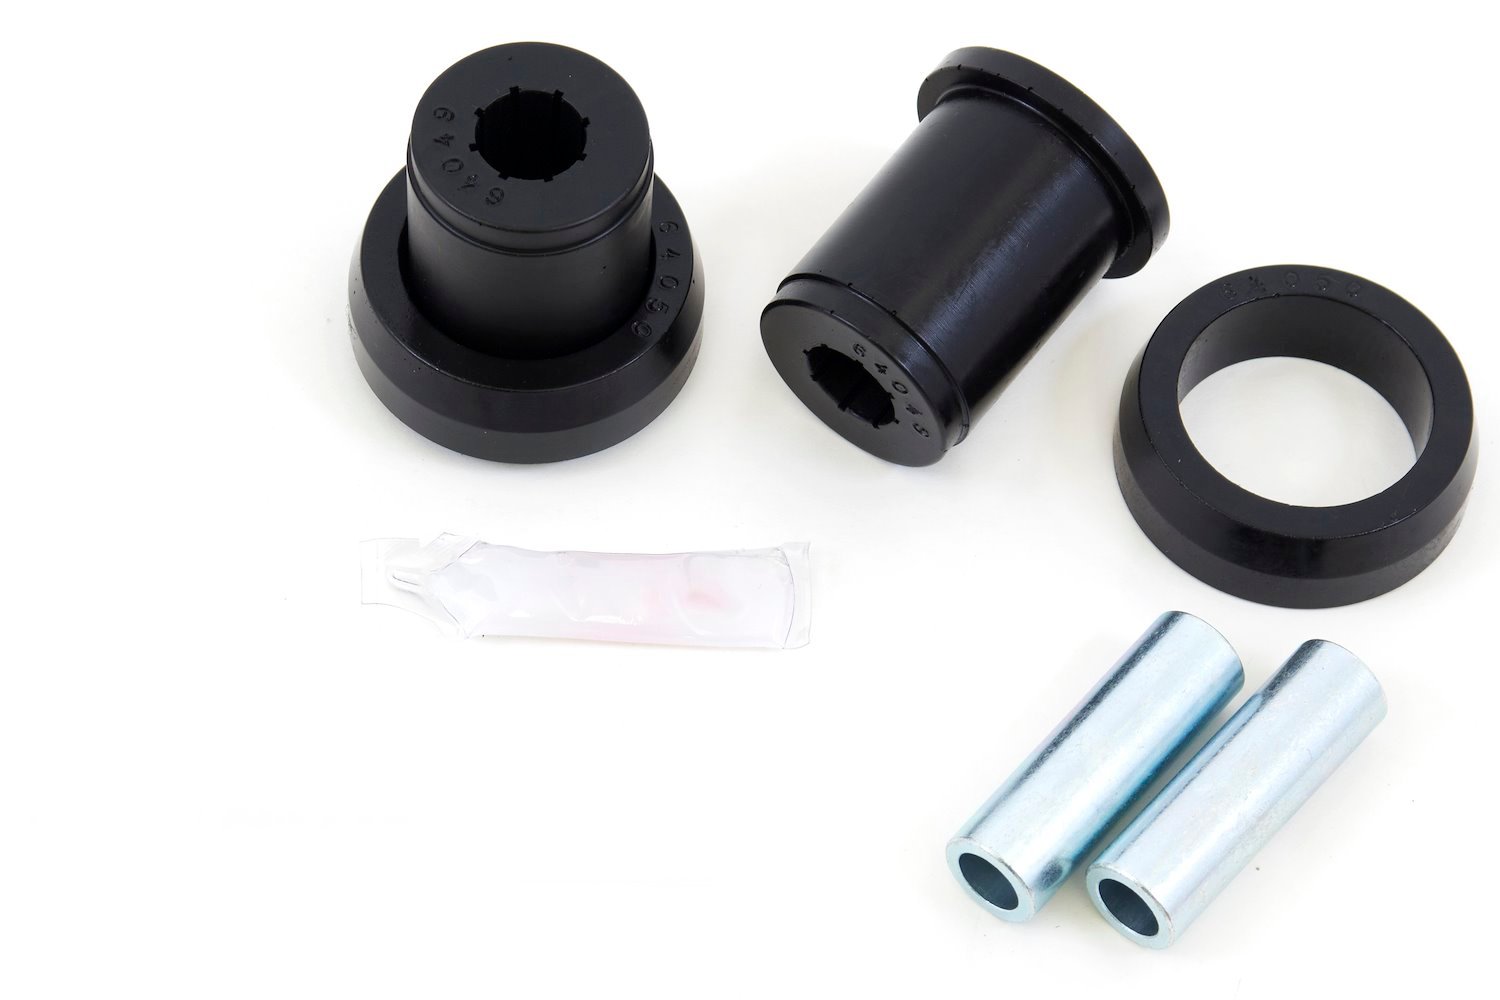 Replace the rubber factory rear end housing bushings with a polyurethane setup from UMI. Over time r